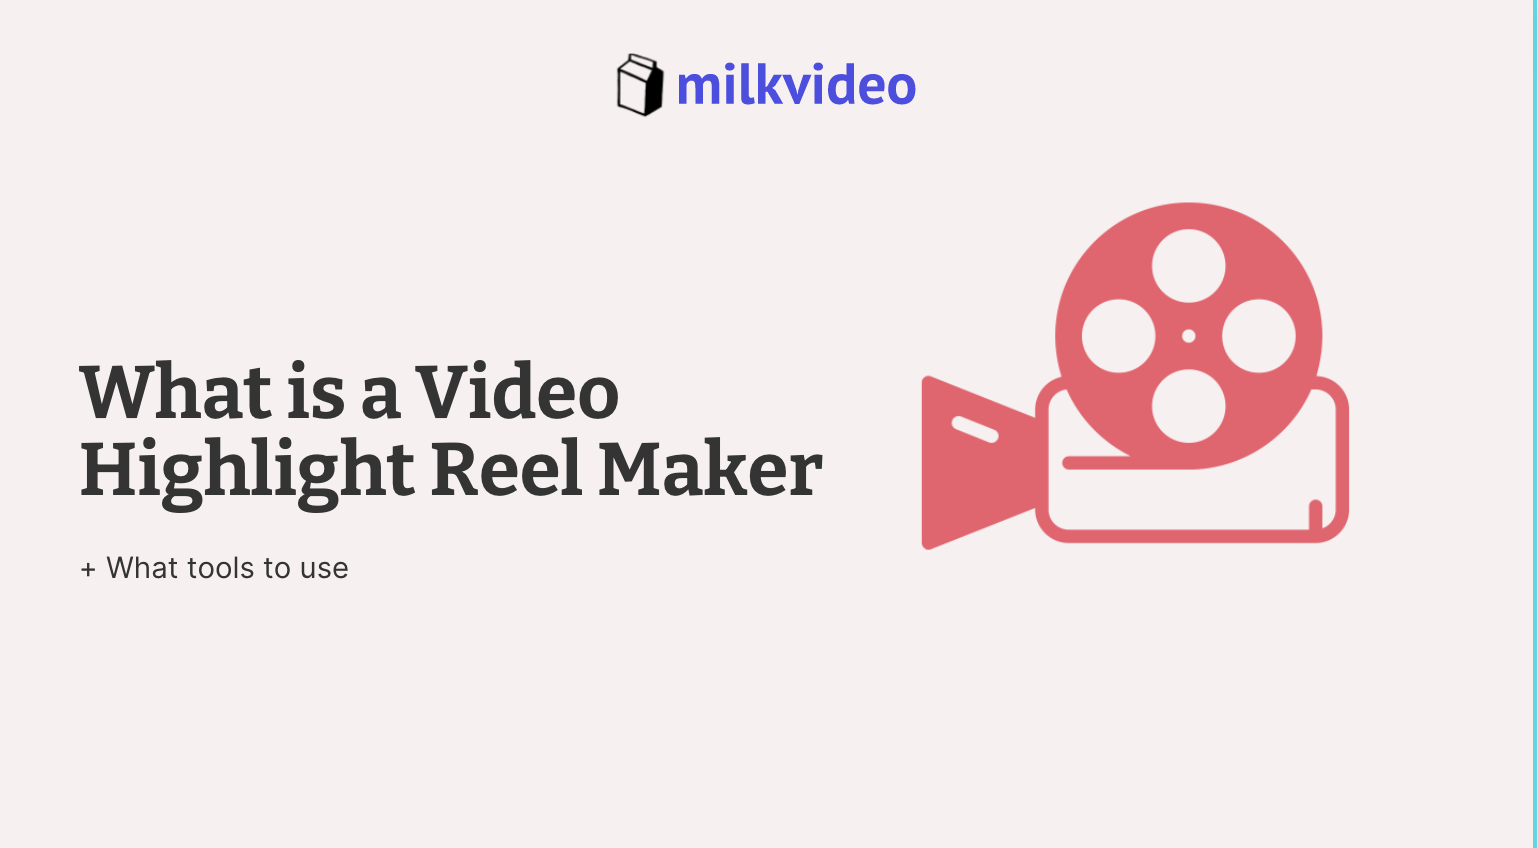 What is a Video Highlight Reel Maker